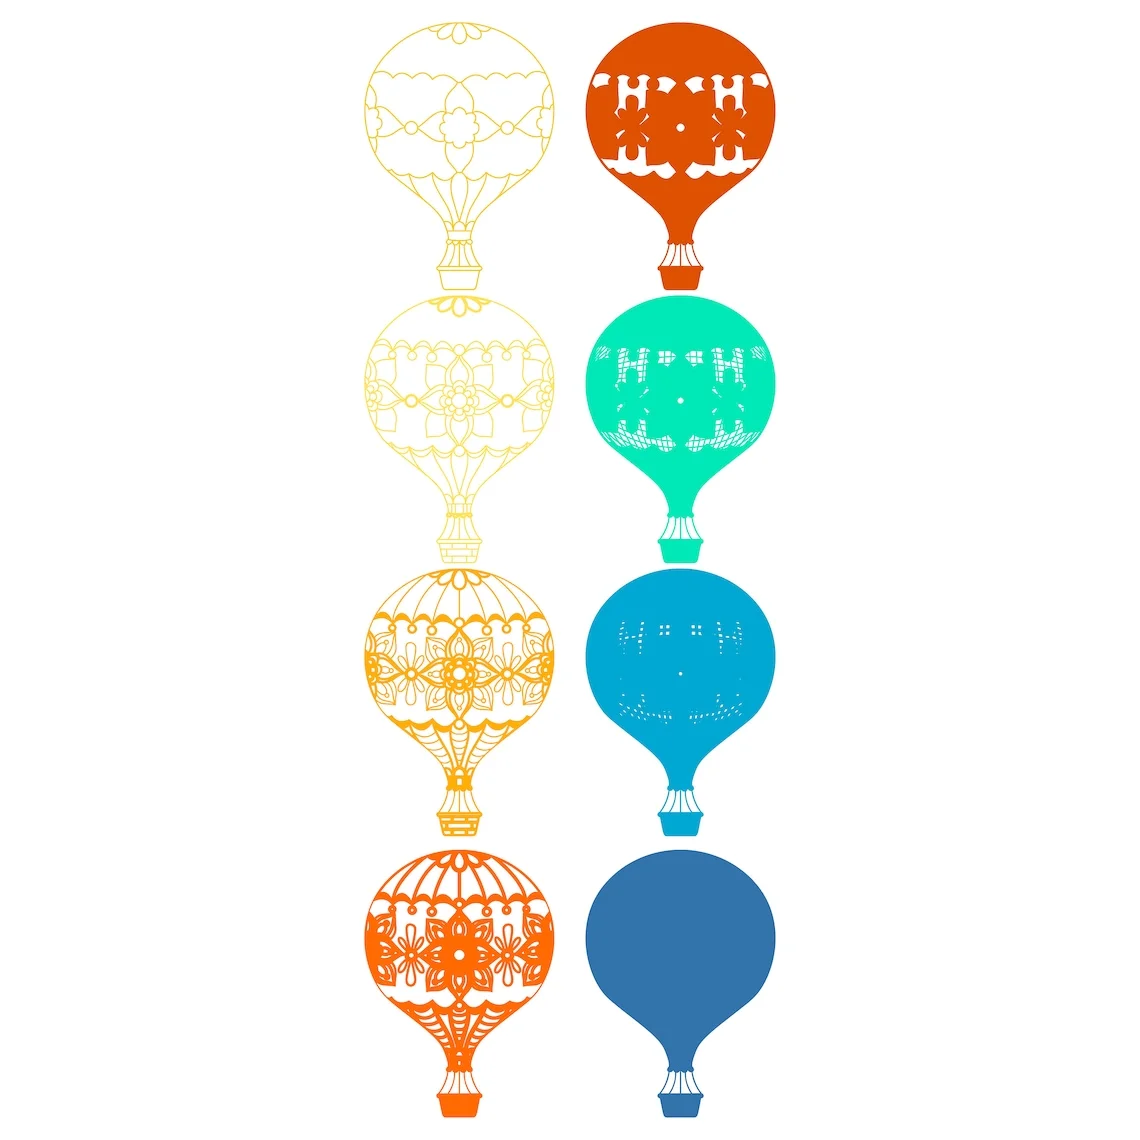 Multilayer Air Balloon Vector Model Home Decor Wall Art DWG DXF SVG AI EPS File for Laser Cutter and Cricut Maker harbor freight woodworking bench